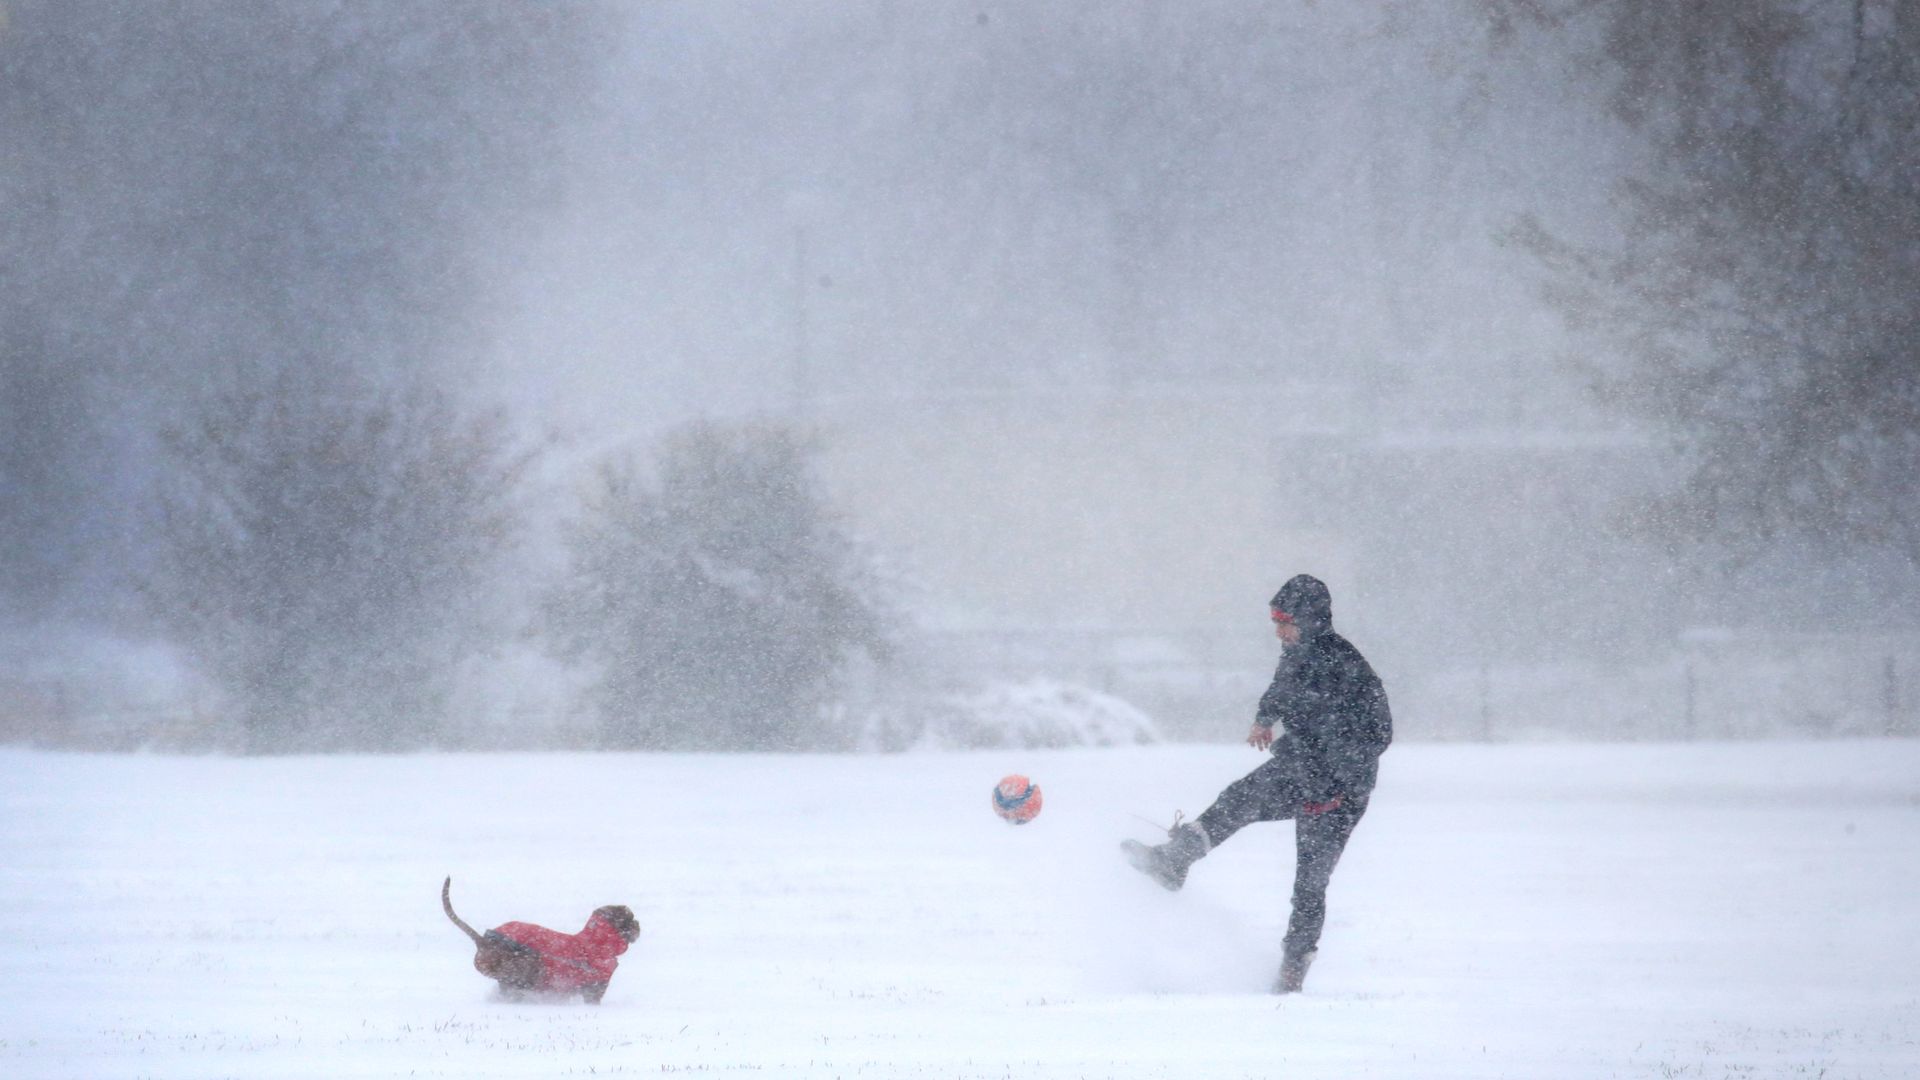 A resident plays with his dog as snow falls in Humboldt Park on November 11, 2019 in Chicago